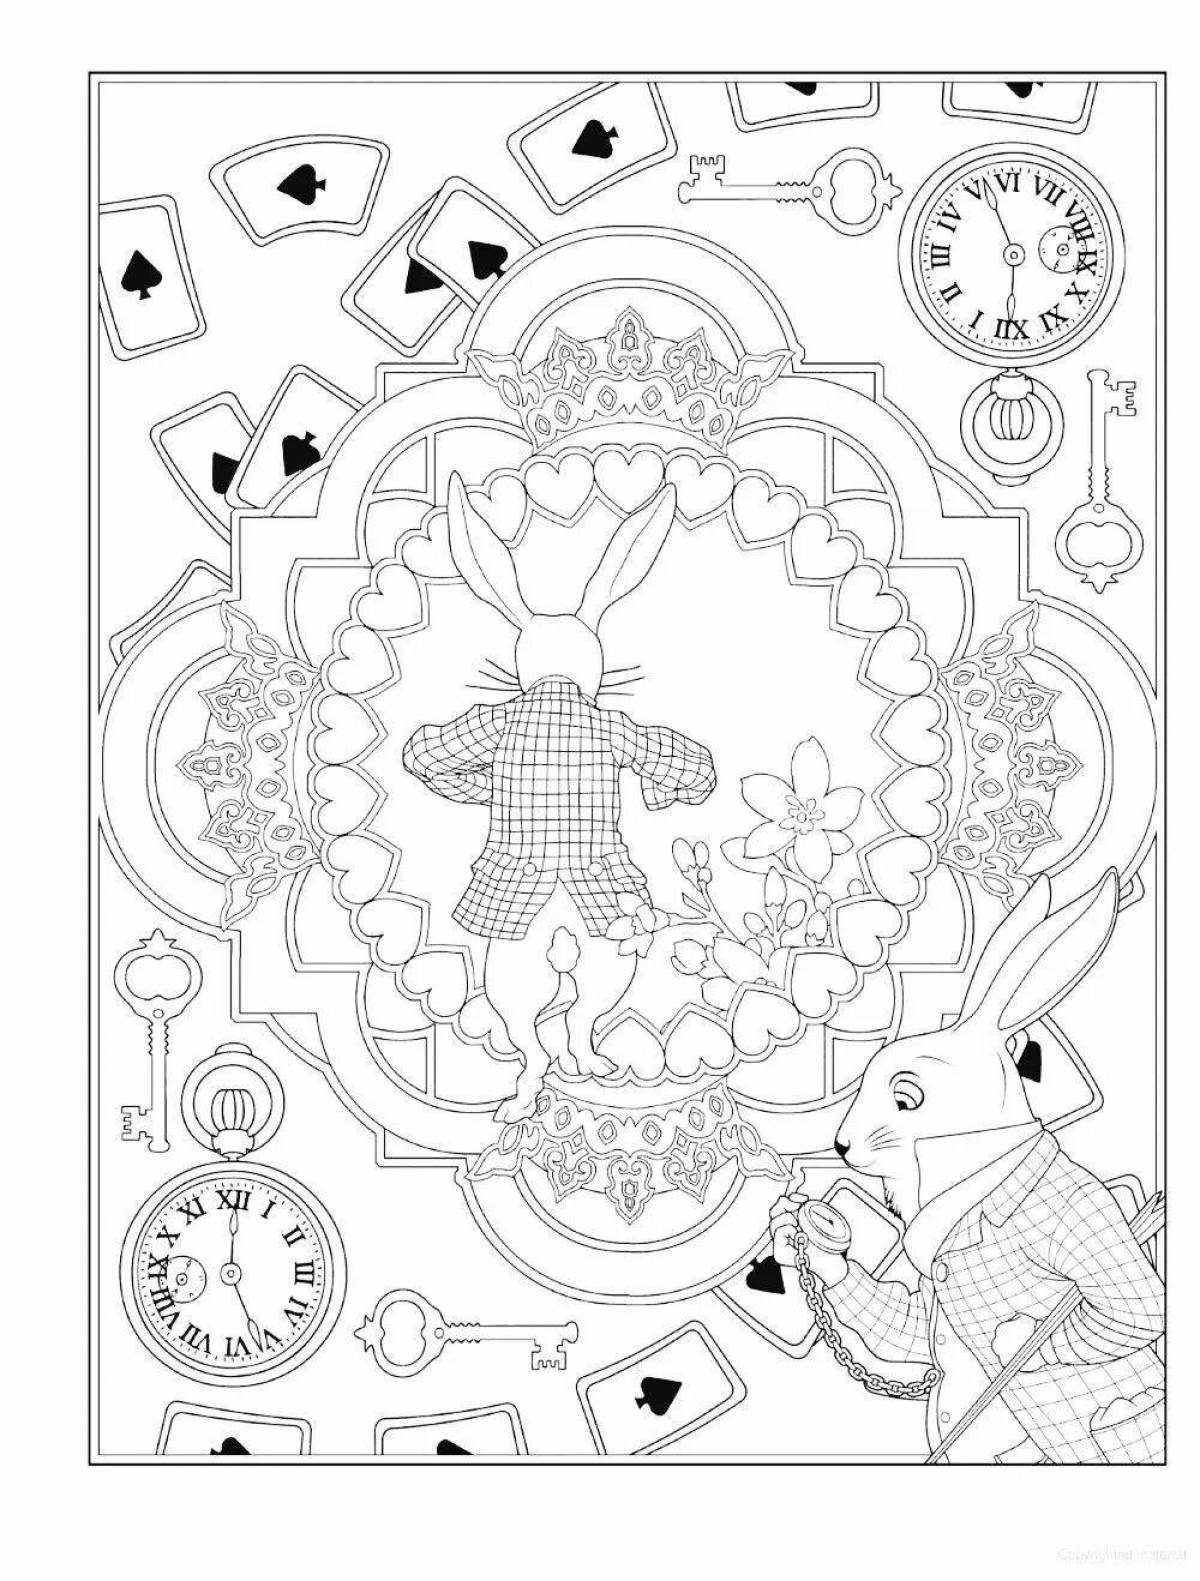 Exciting coloring book hidden worlds beyond imagination